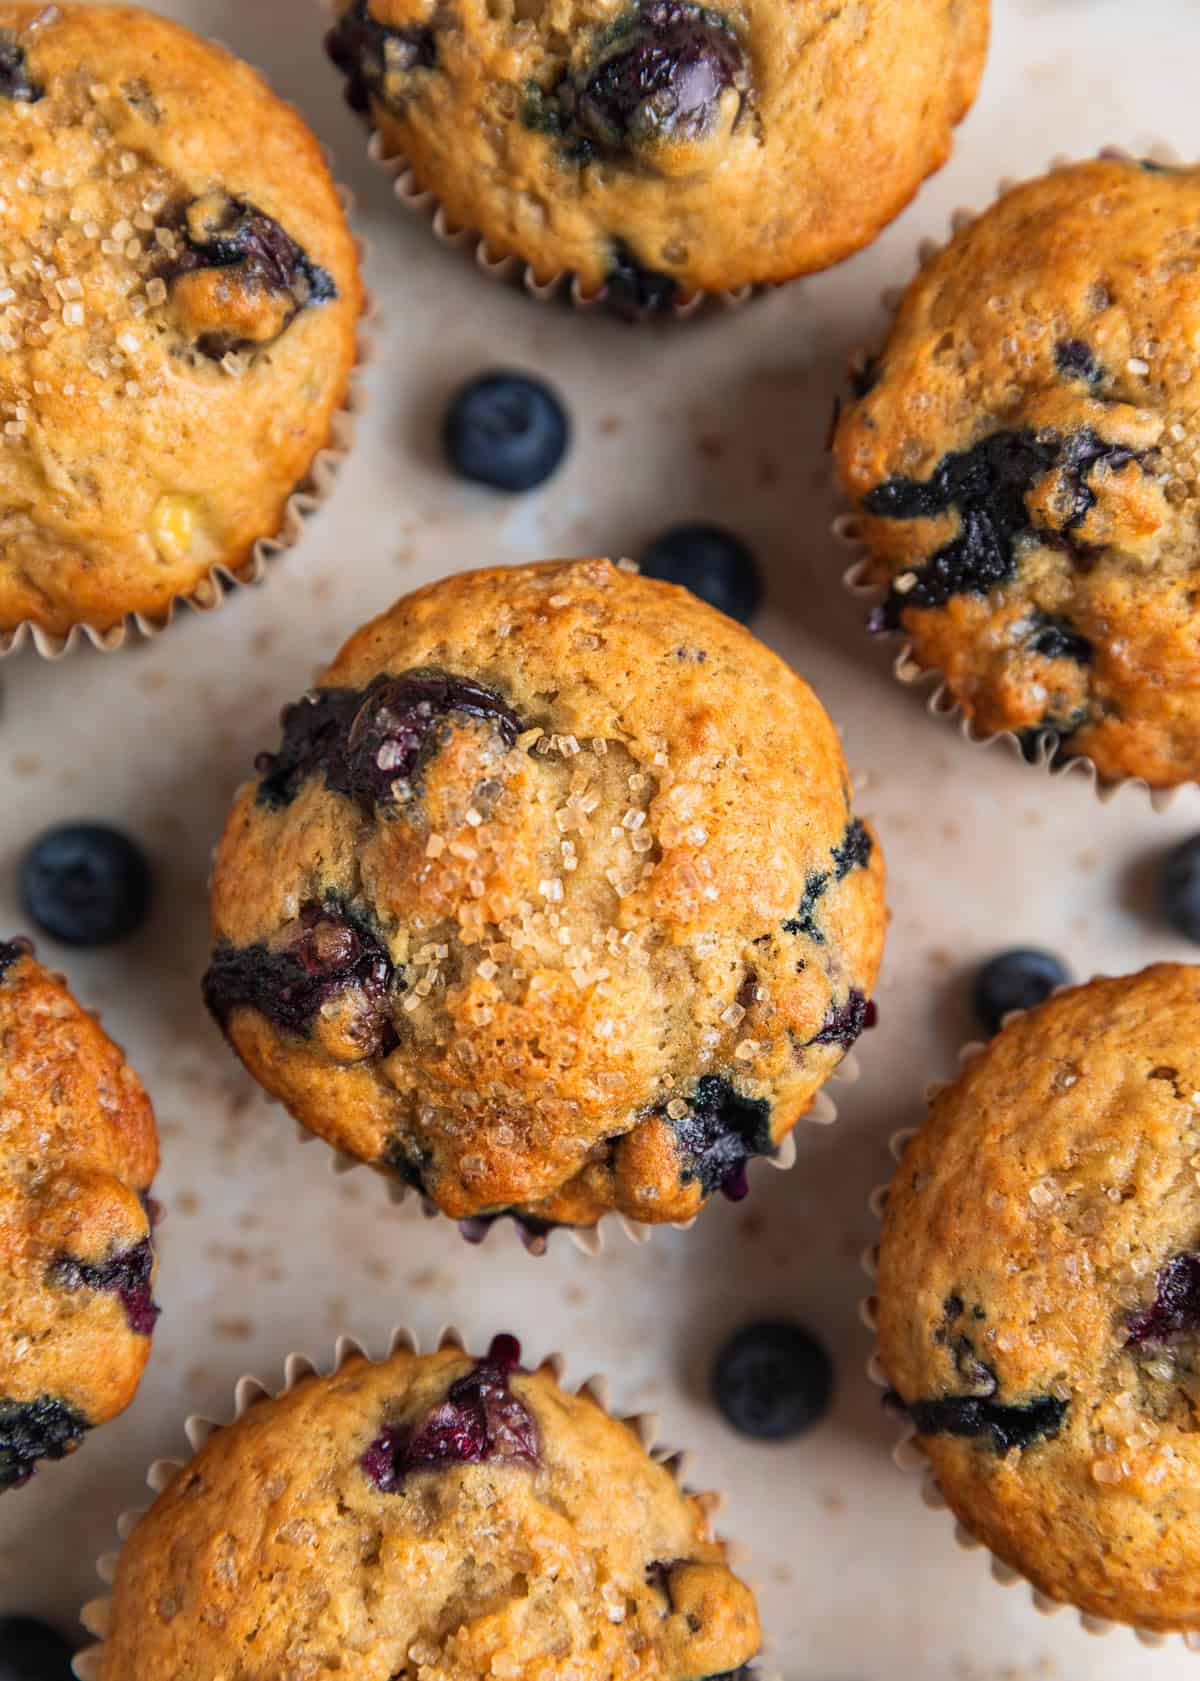 Overhead view of baked banana blueberry muffins on surface with coarse sugar and berries surrounding.